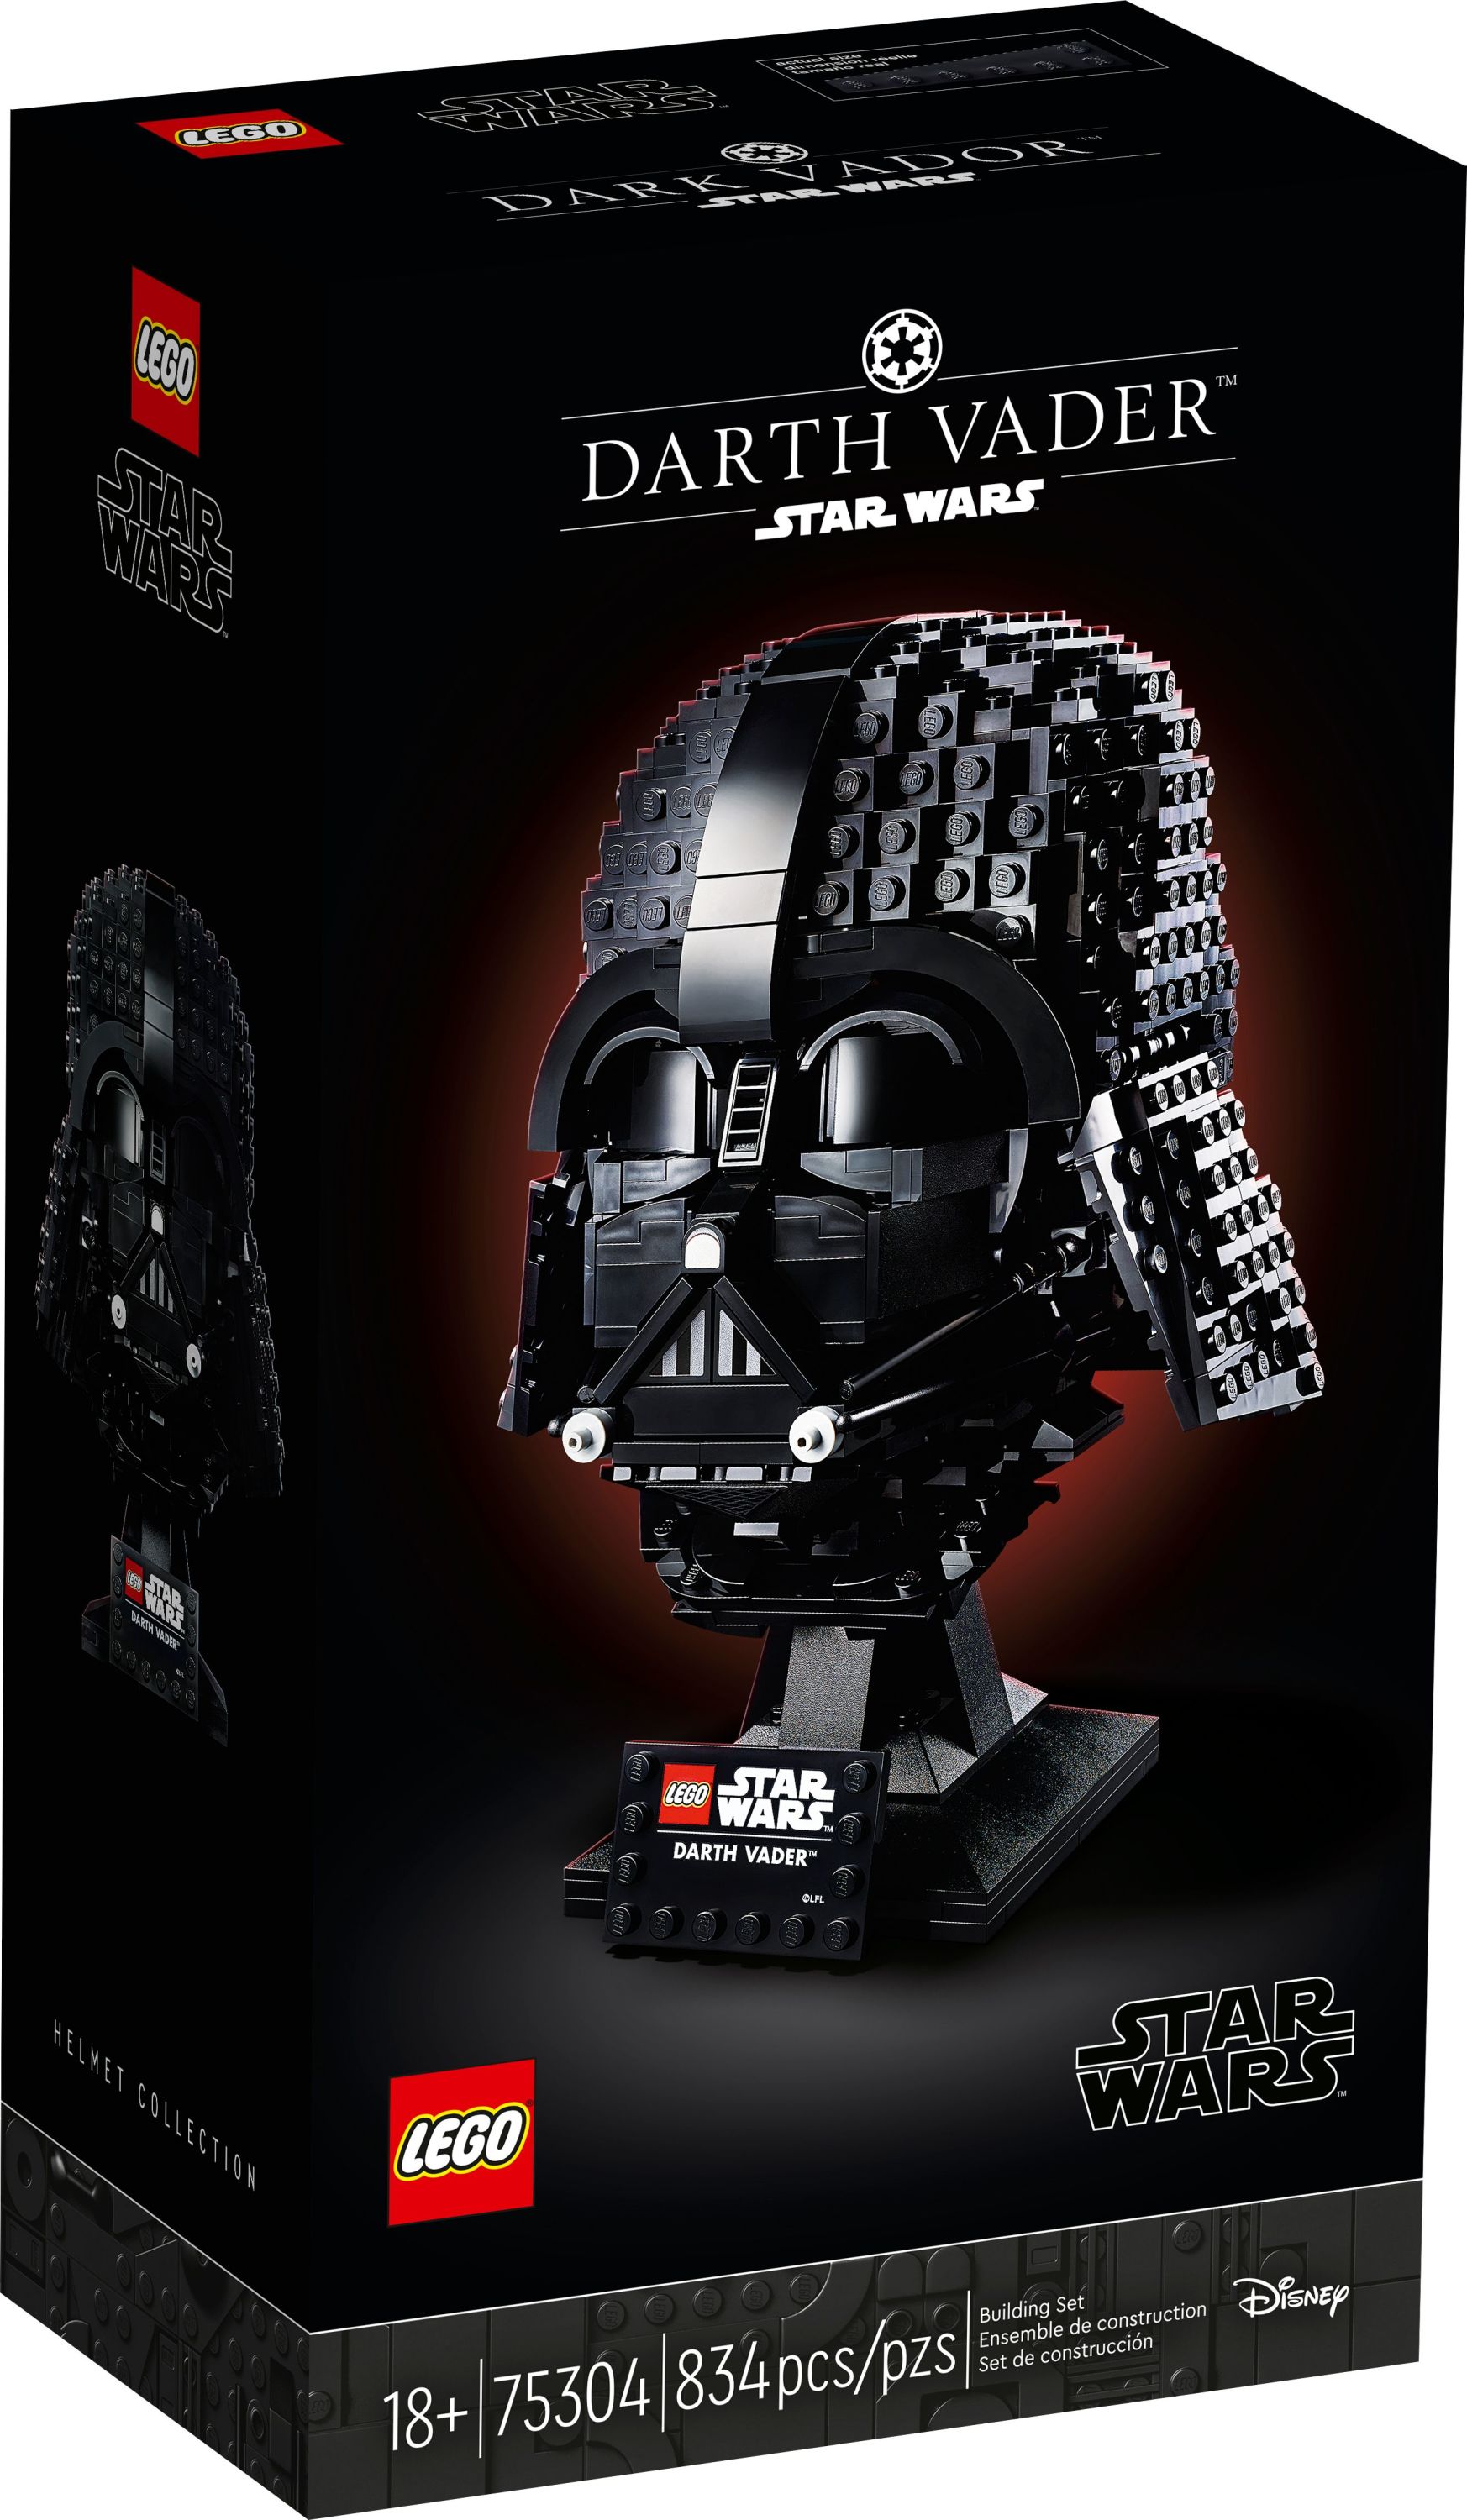 LEGO Star Wars Darth Vader Helmet 75304 Set, Mask Display Model Kit for Adults to Build, Gift Idea for Men, Women, Him or Her, Collectible Home Decor Model - image 3 of 8